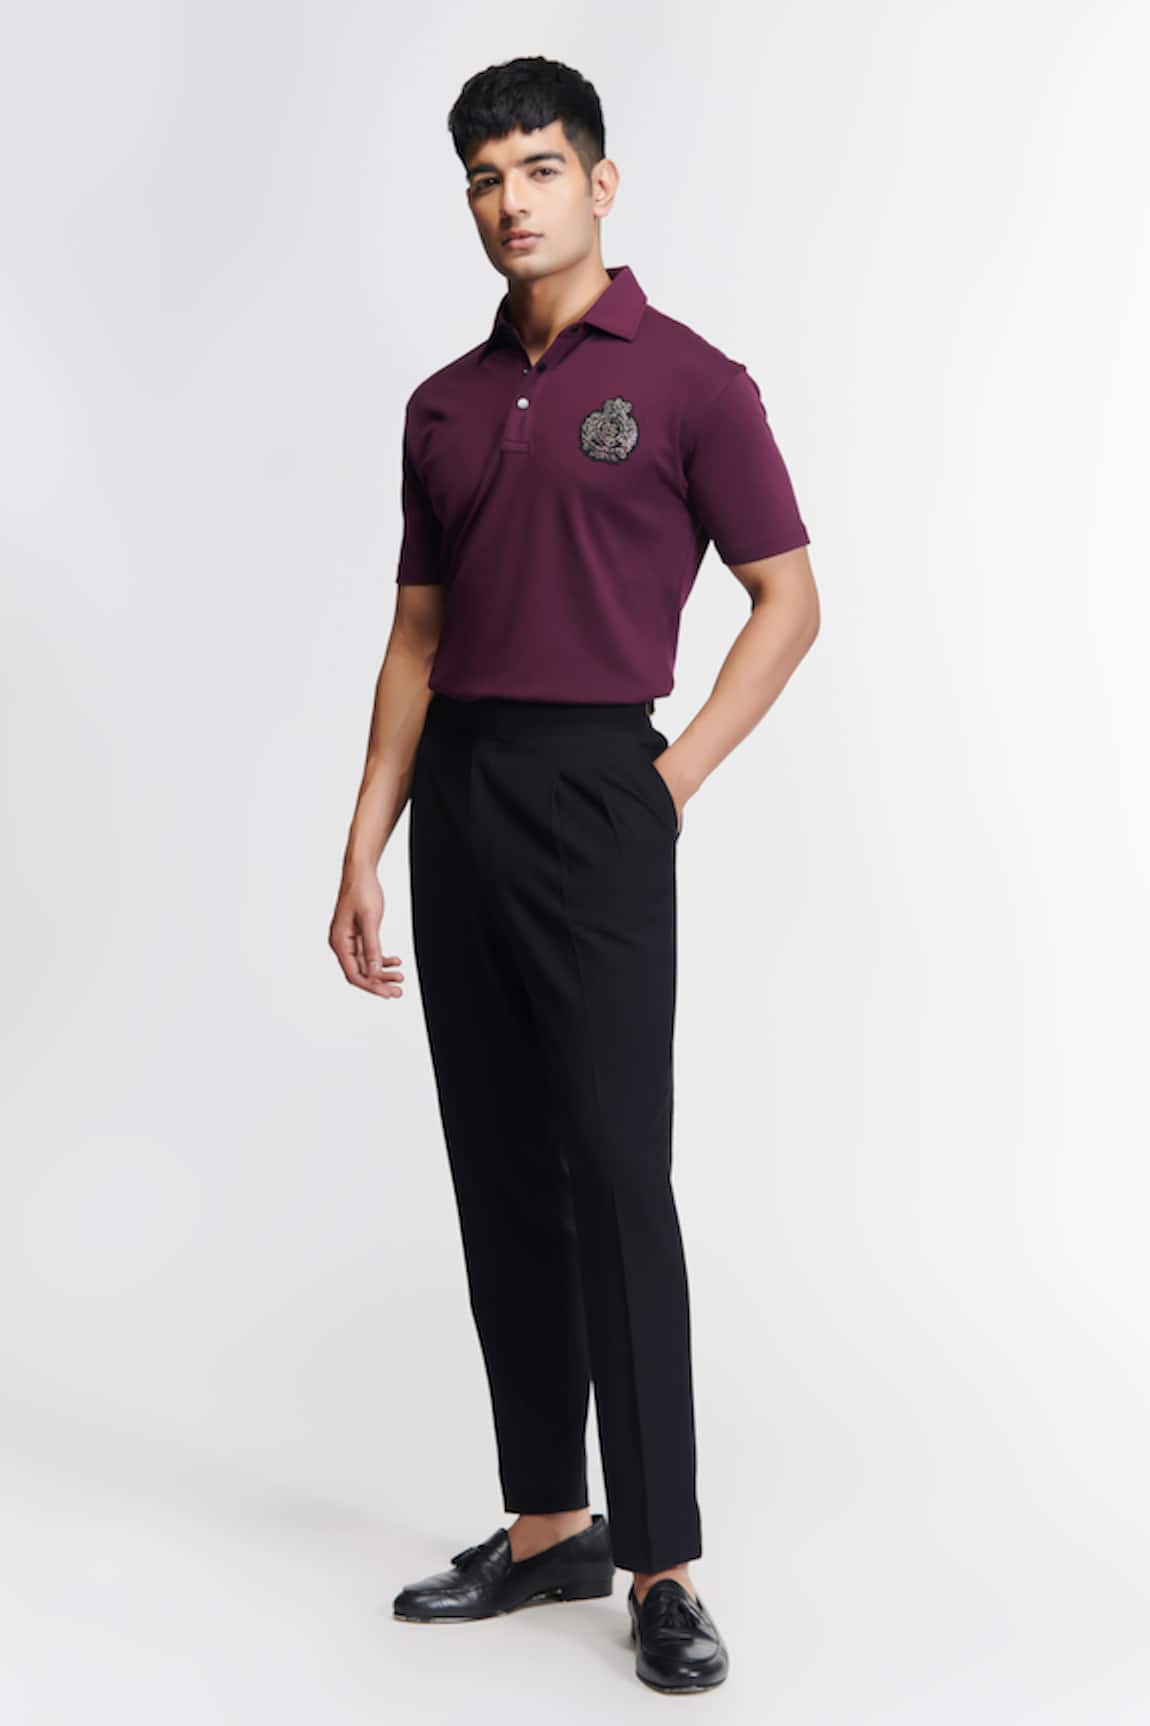 S&N by Shantnu Nikhil Embroidered Crest Placement T-Shirt